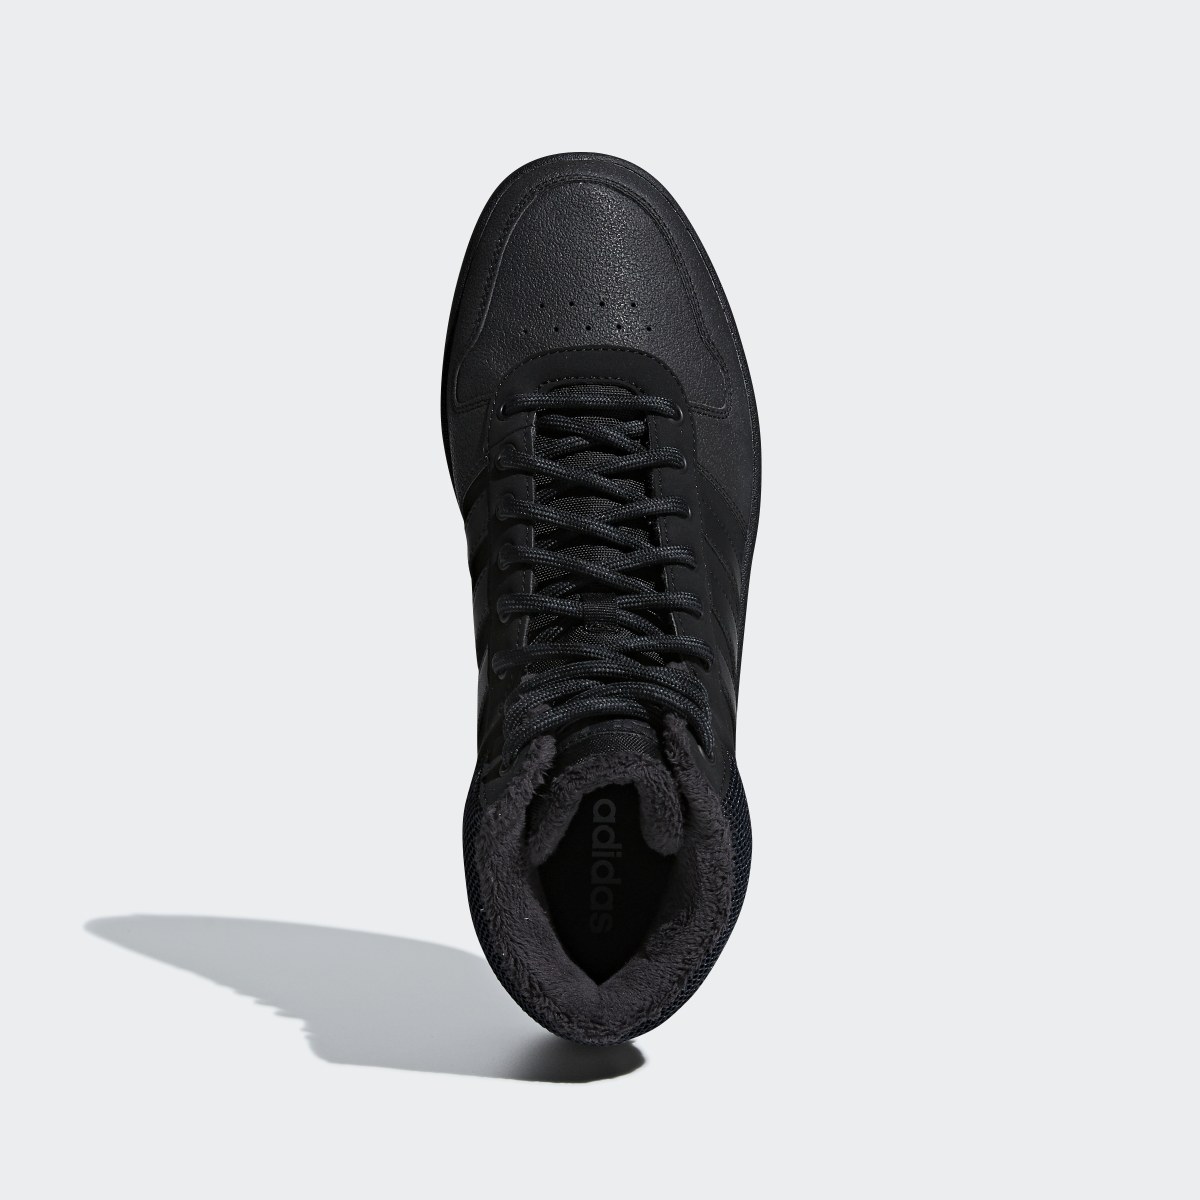 Adidas Hoops 2.0 Mid Shoes. 4